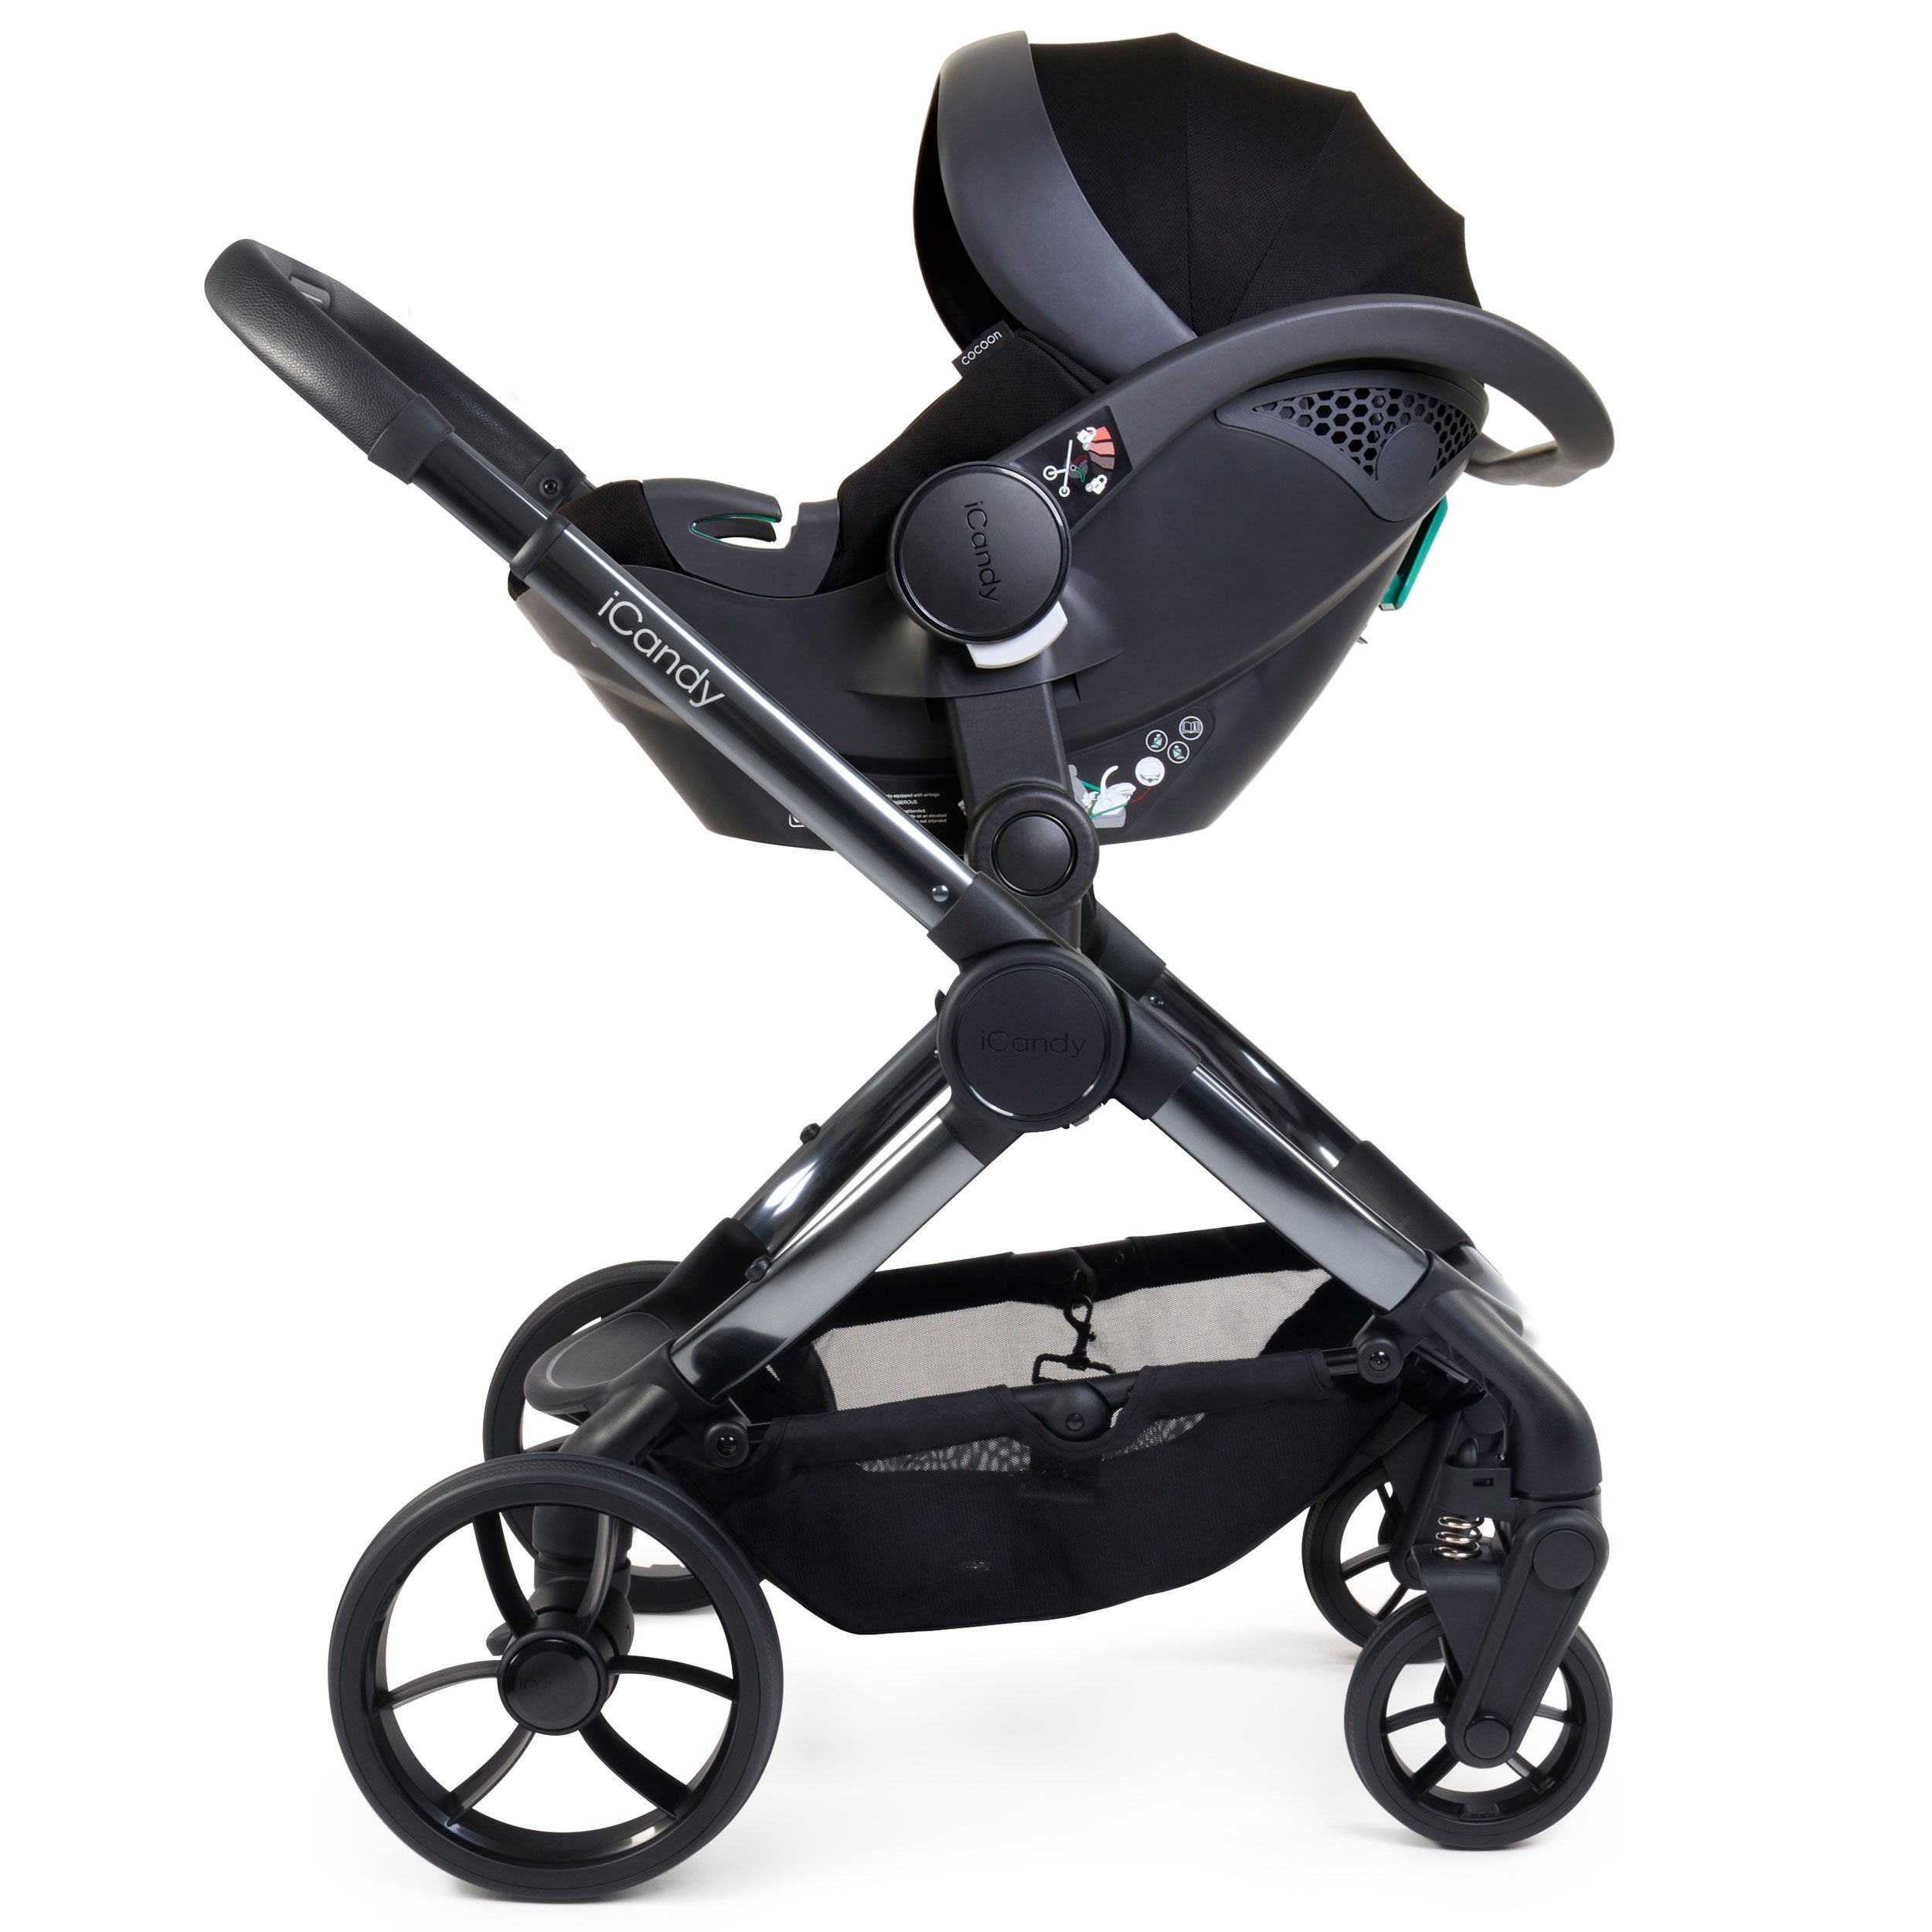 iCandy Peach 7 Complete Bundle with COCOON Car Seat in Blush